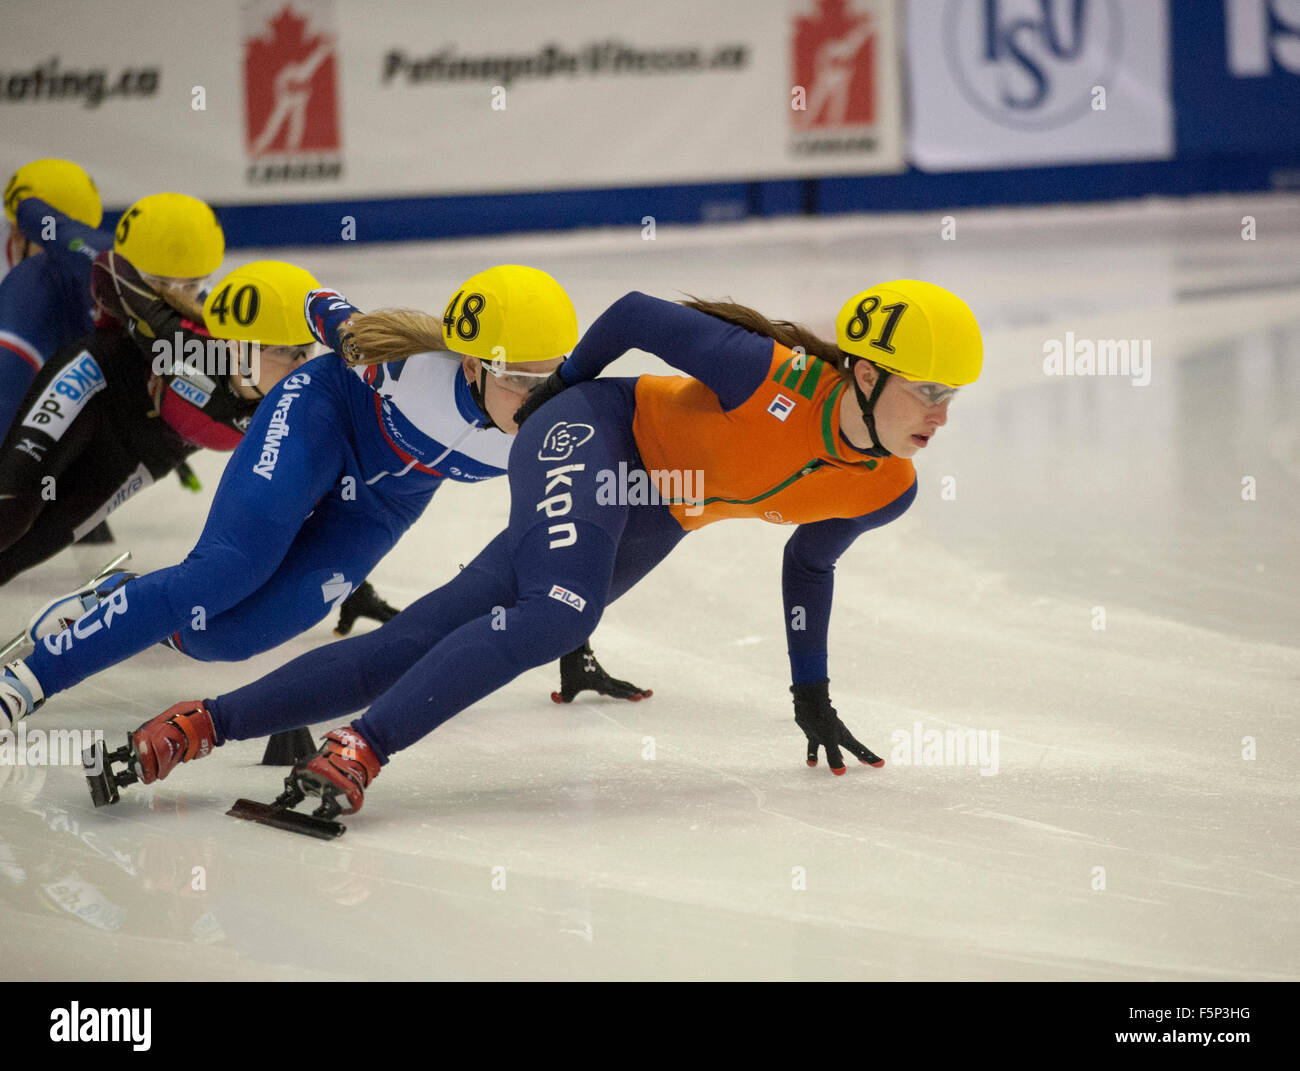 Toronto, Canada. 7 Novembre 2015: ISU WORLD CUP Short Track, Toronto - Suzanne Schulting (81) (NED) compete in campo femminile 1500m B-finale. Foto: Peter Llewellyn/Alamy Live News Foto Stock